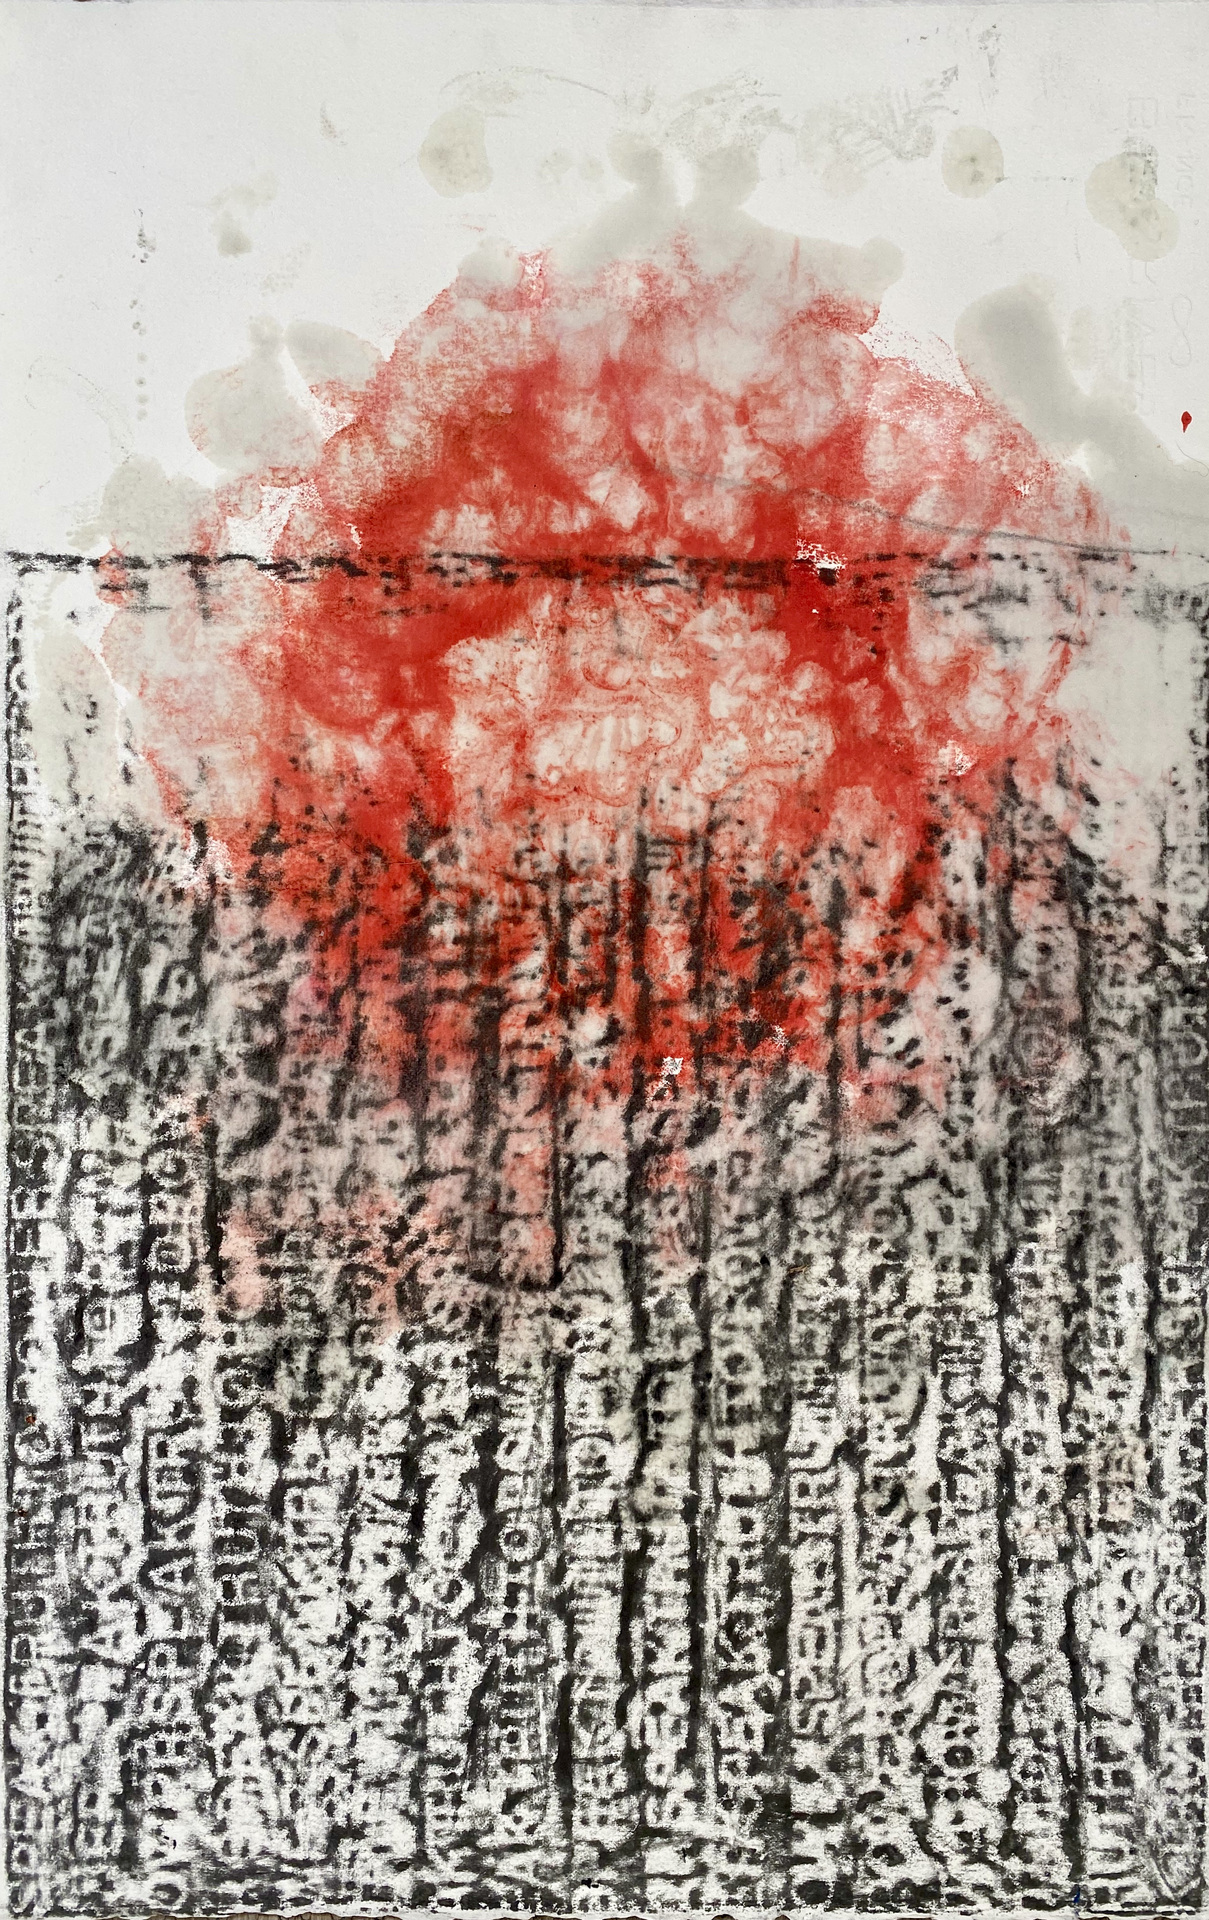 Caryl St. Ama uses encaustic paint and encaustic monotype to create this work with the message “Speak Truth to Power” blended tnto the art work. 